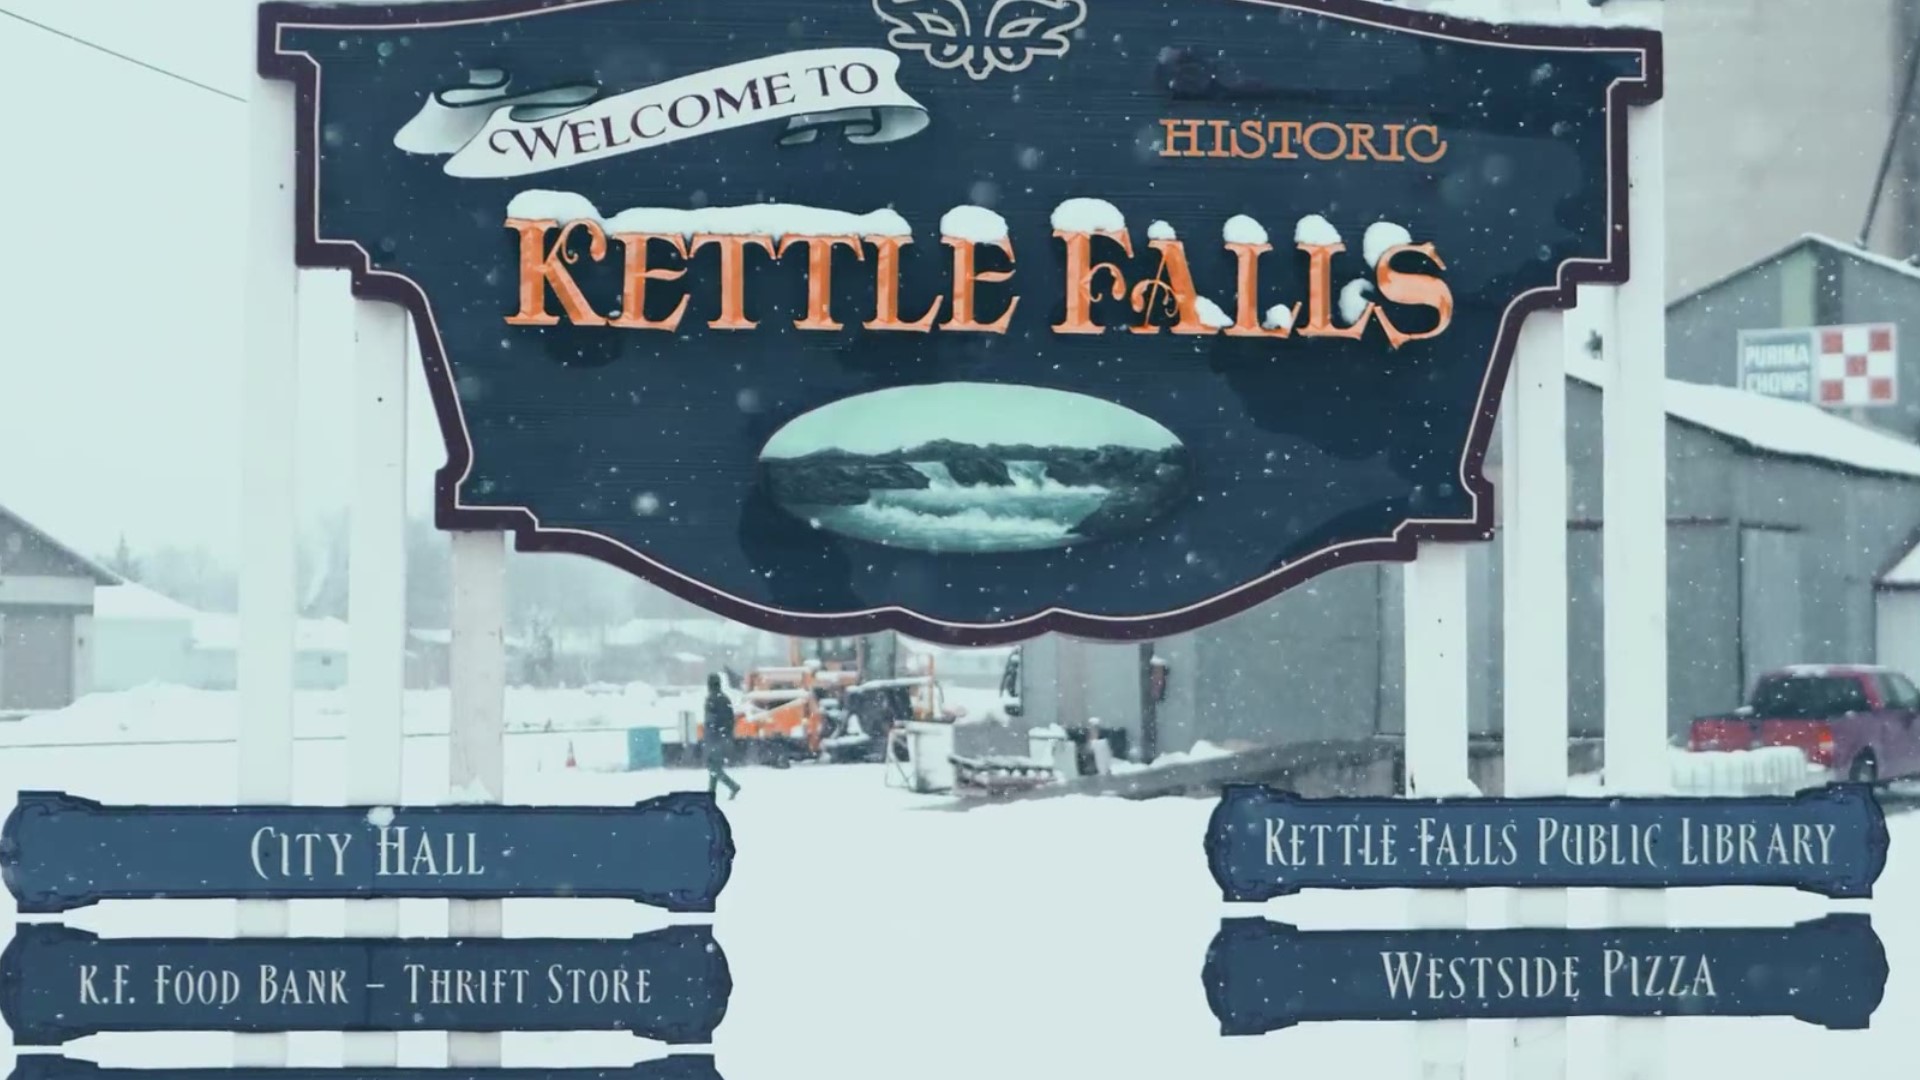 The Kettle Falls Downtown Association hopes the contest will help them revitalize their small town.